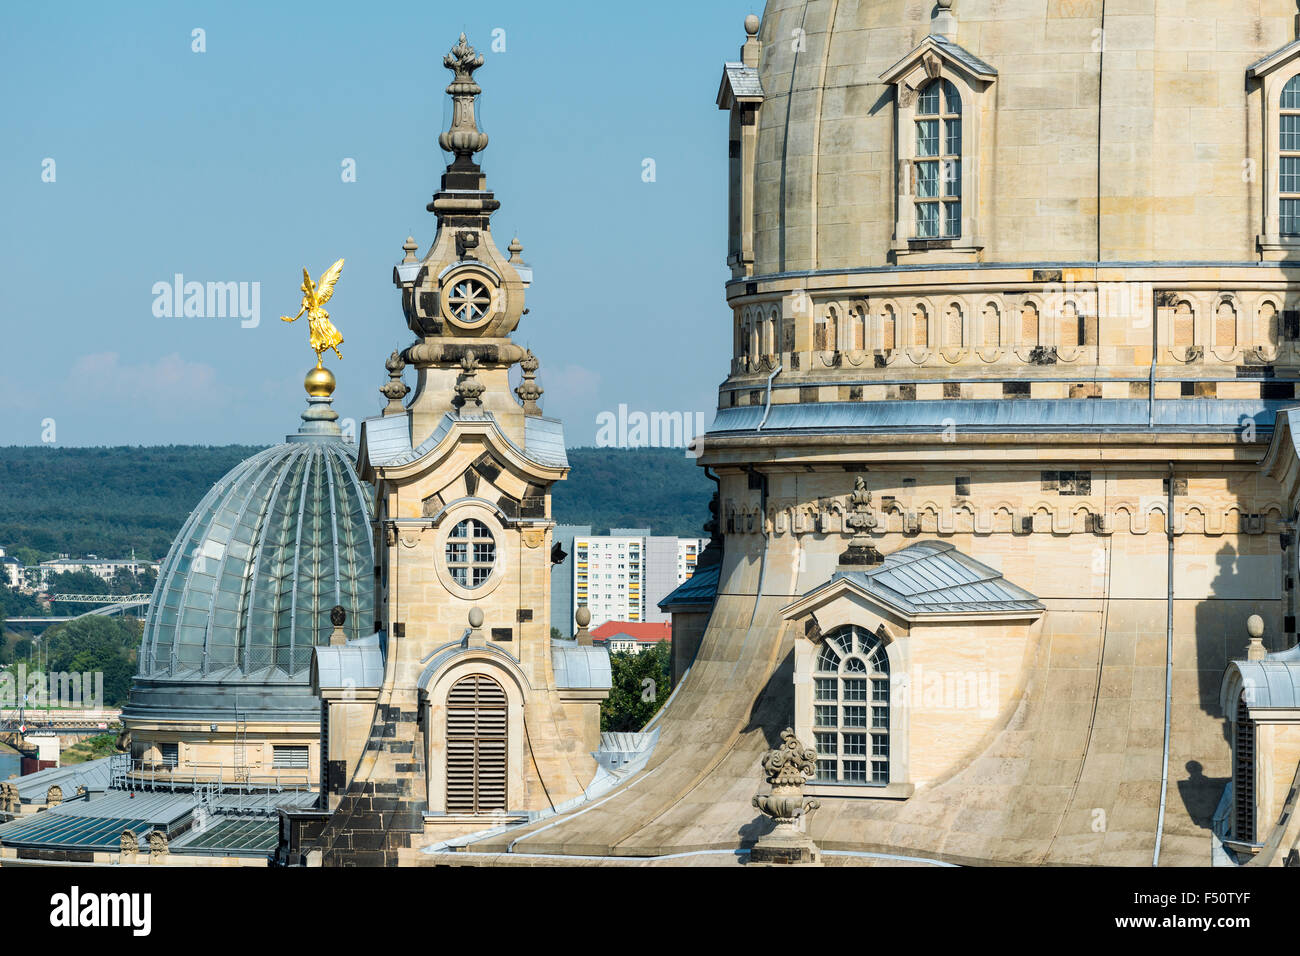 An aerial view of a detail of the Church of our Lady and the roof of the Academy of Arts in the old part of town Stock Photo